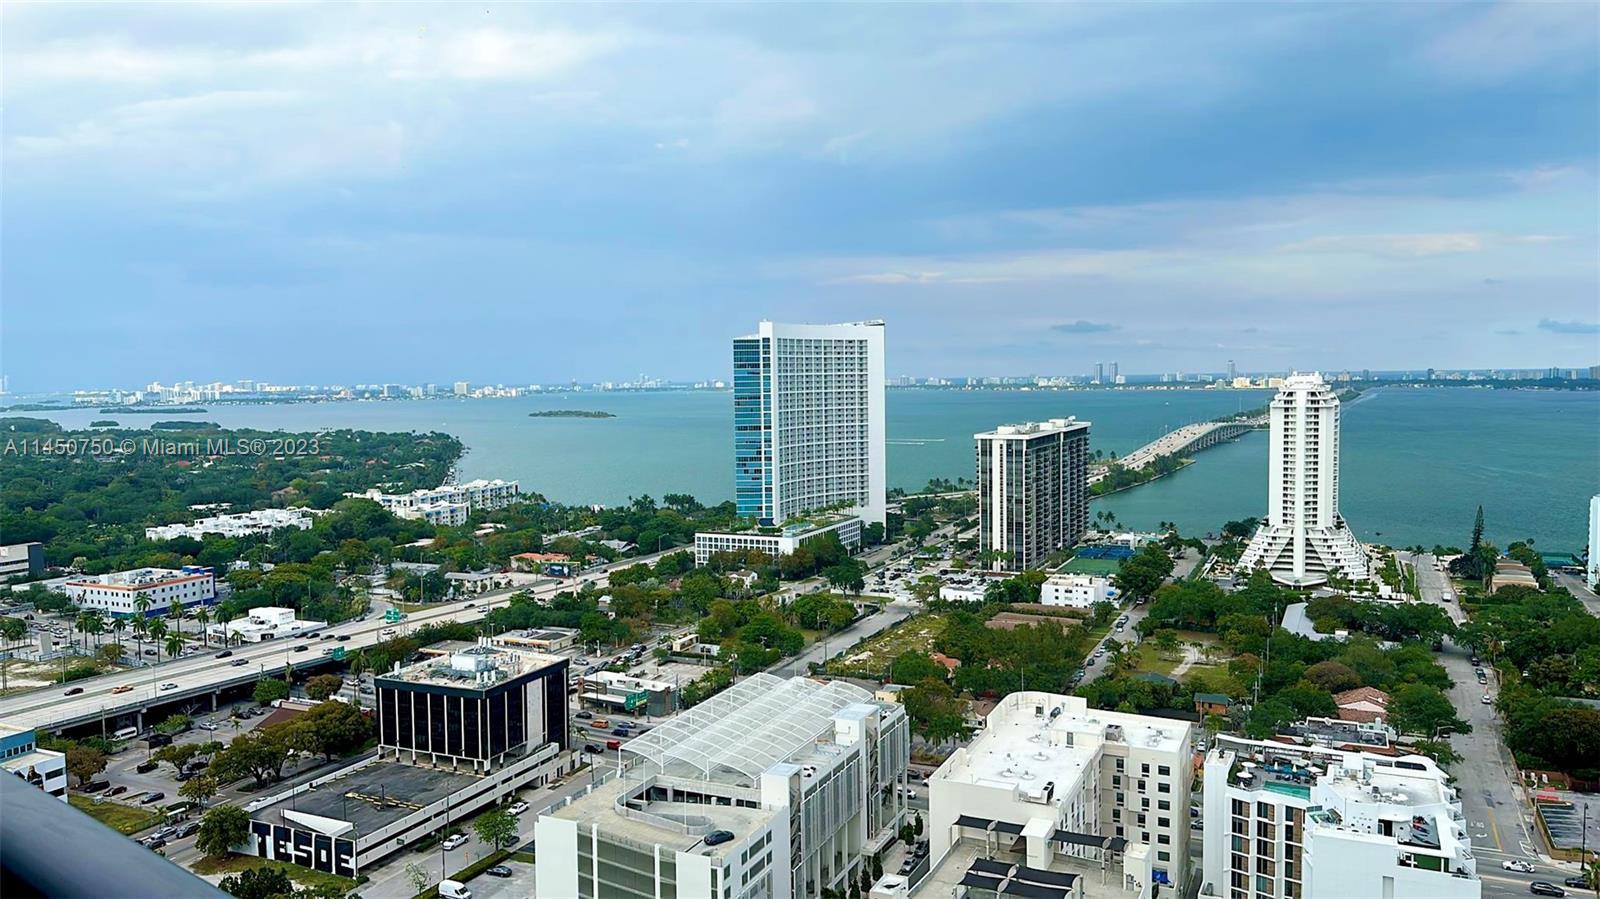 BREATHTAKING DIRECT BAY AND MIAMI SKYLINE VIEWS FROM THIS AMAZING FULLY FURNISHED 2 BEDROOM +CONVERT